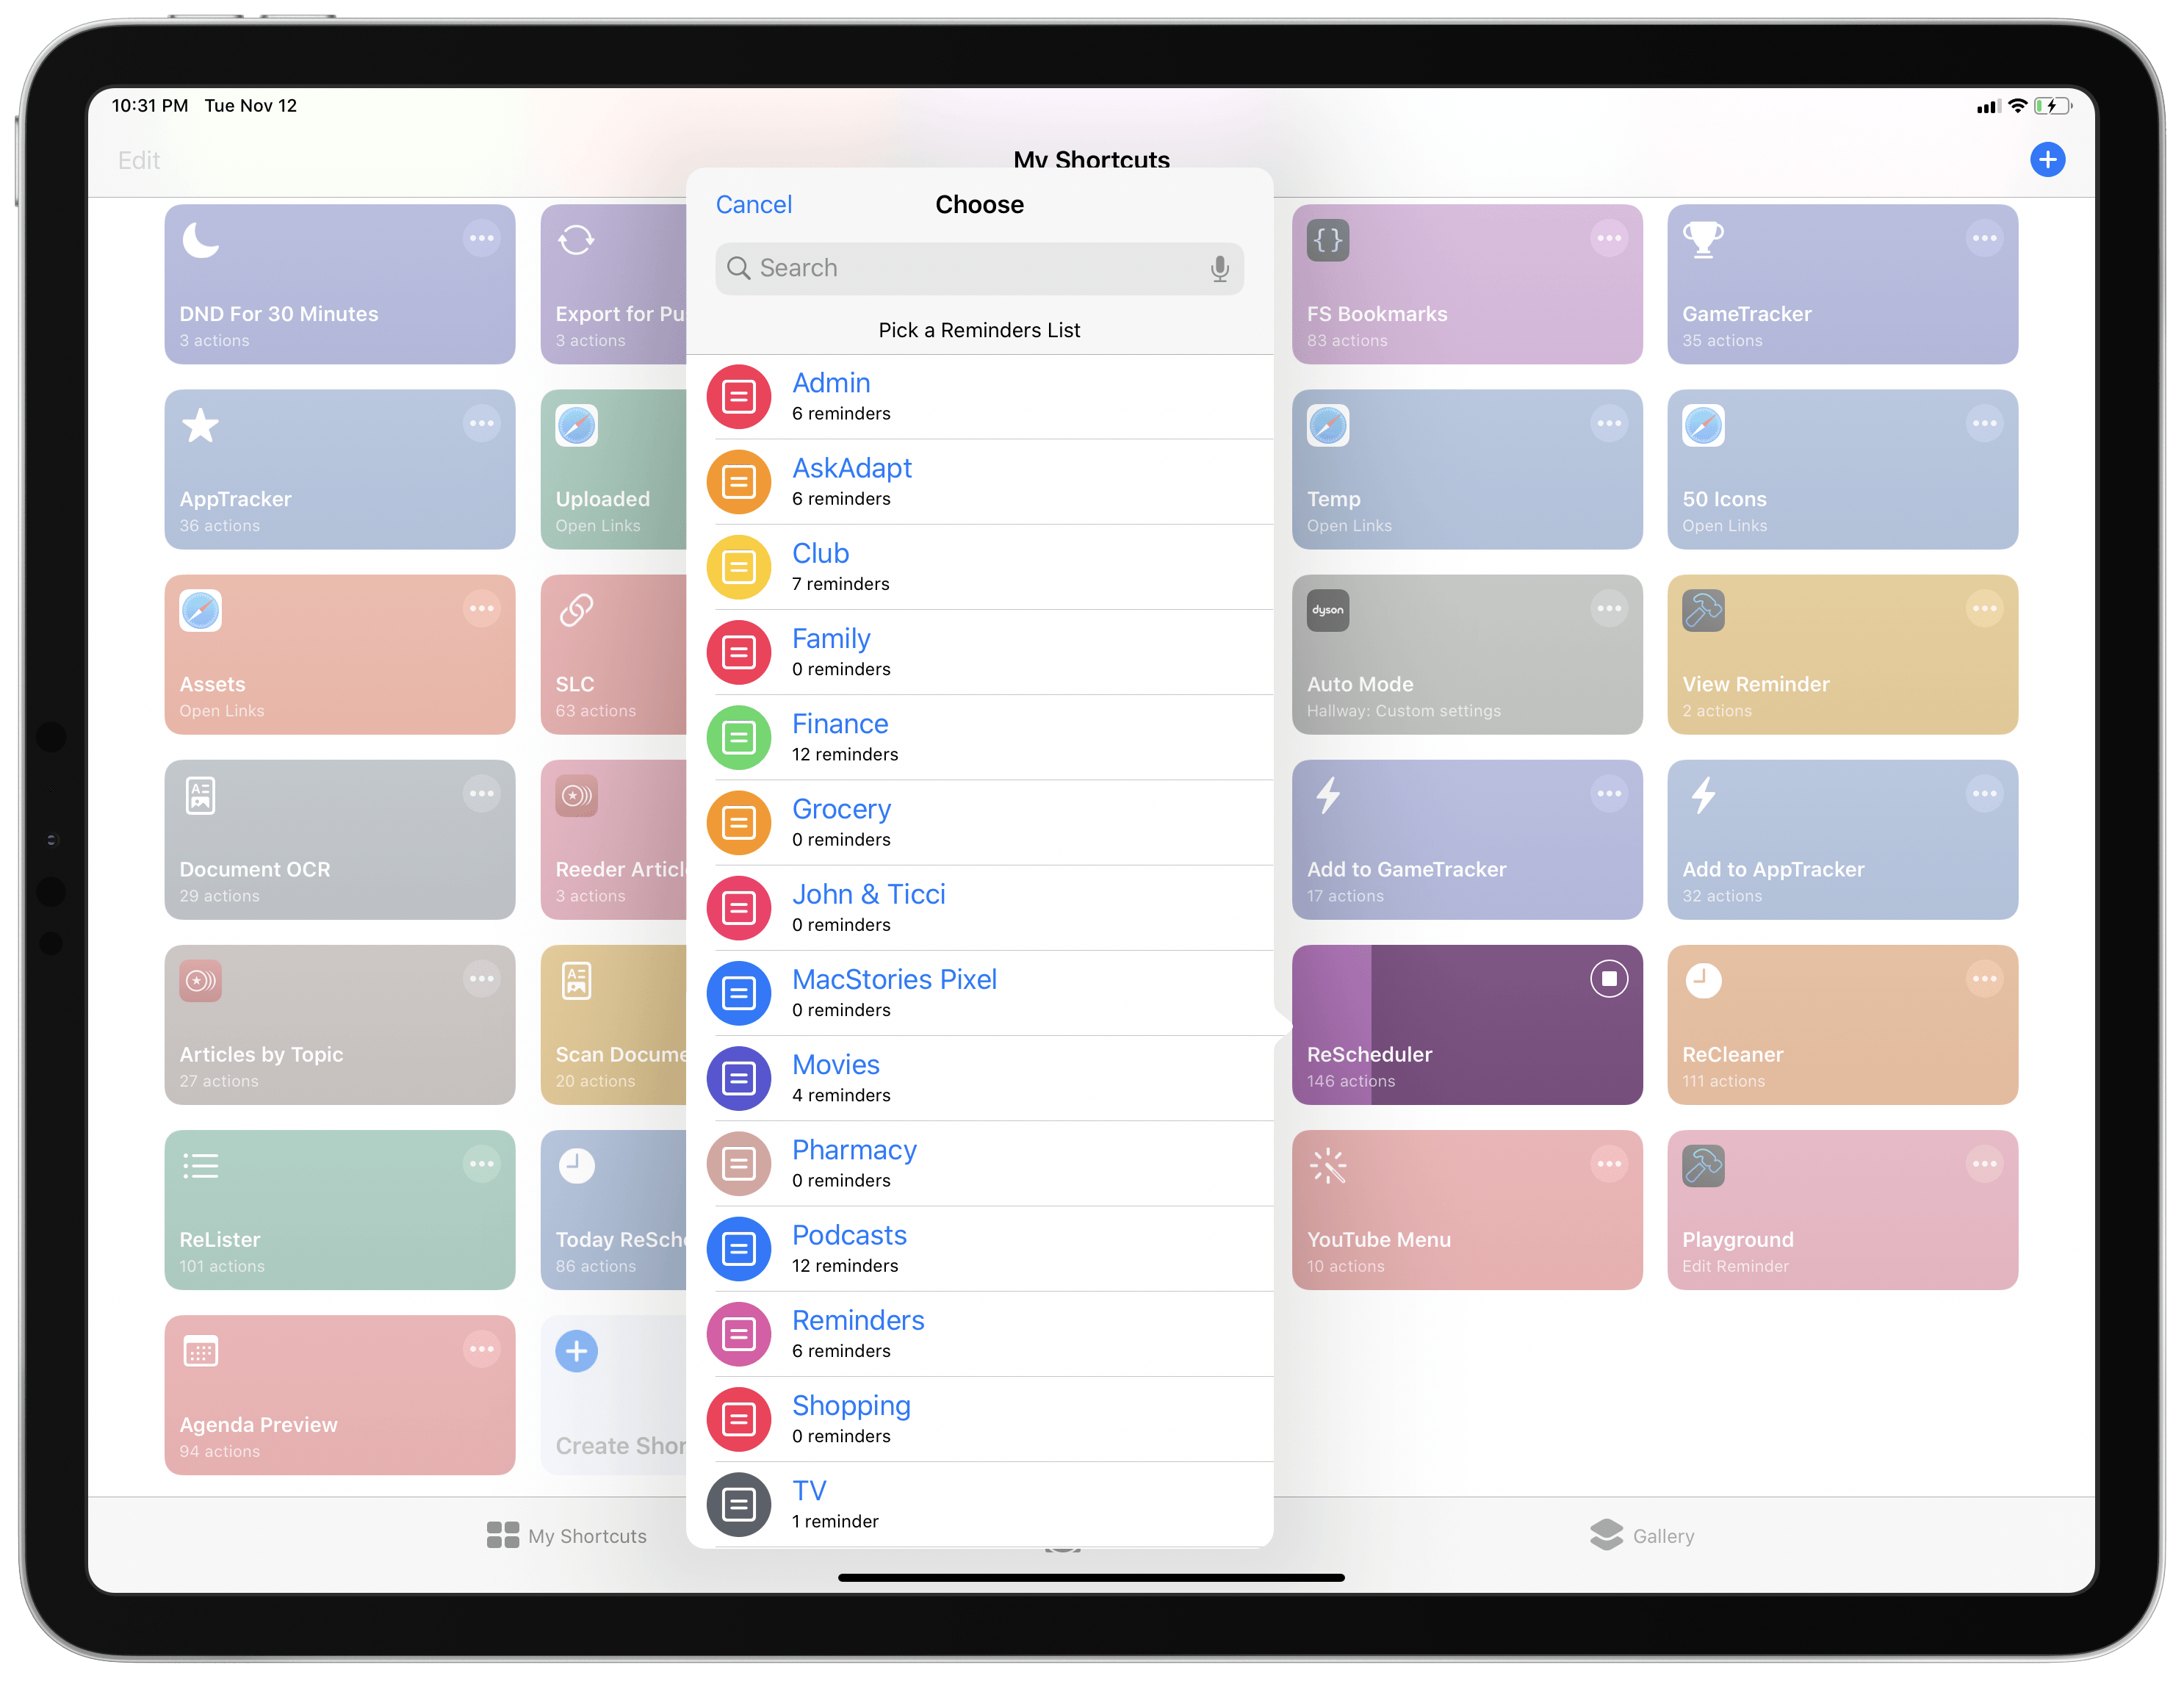 A rich menu created with Toolbox Pro in Shortcuts.